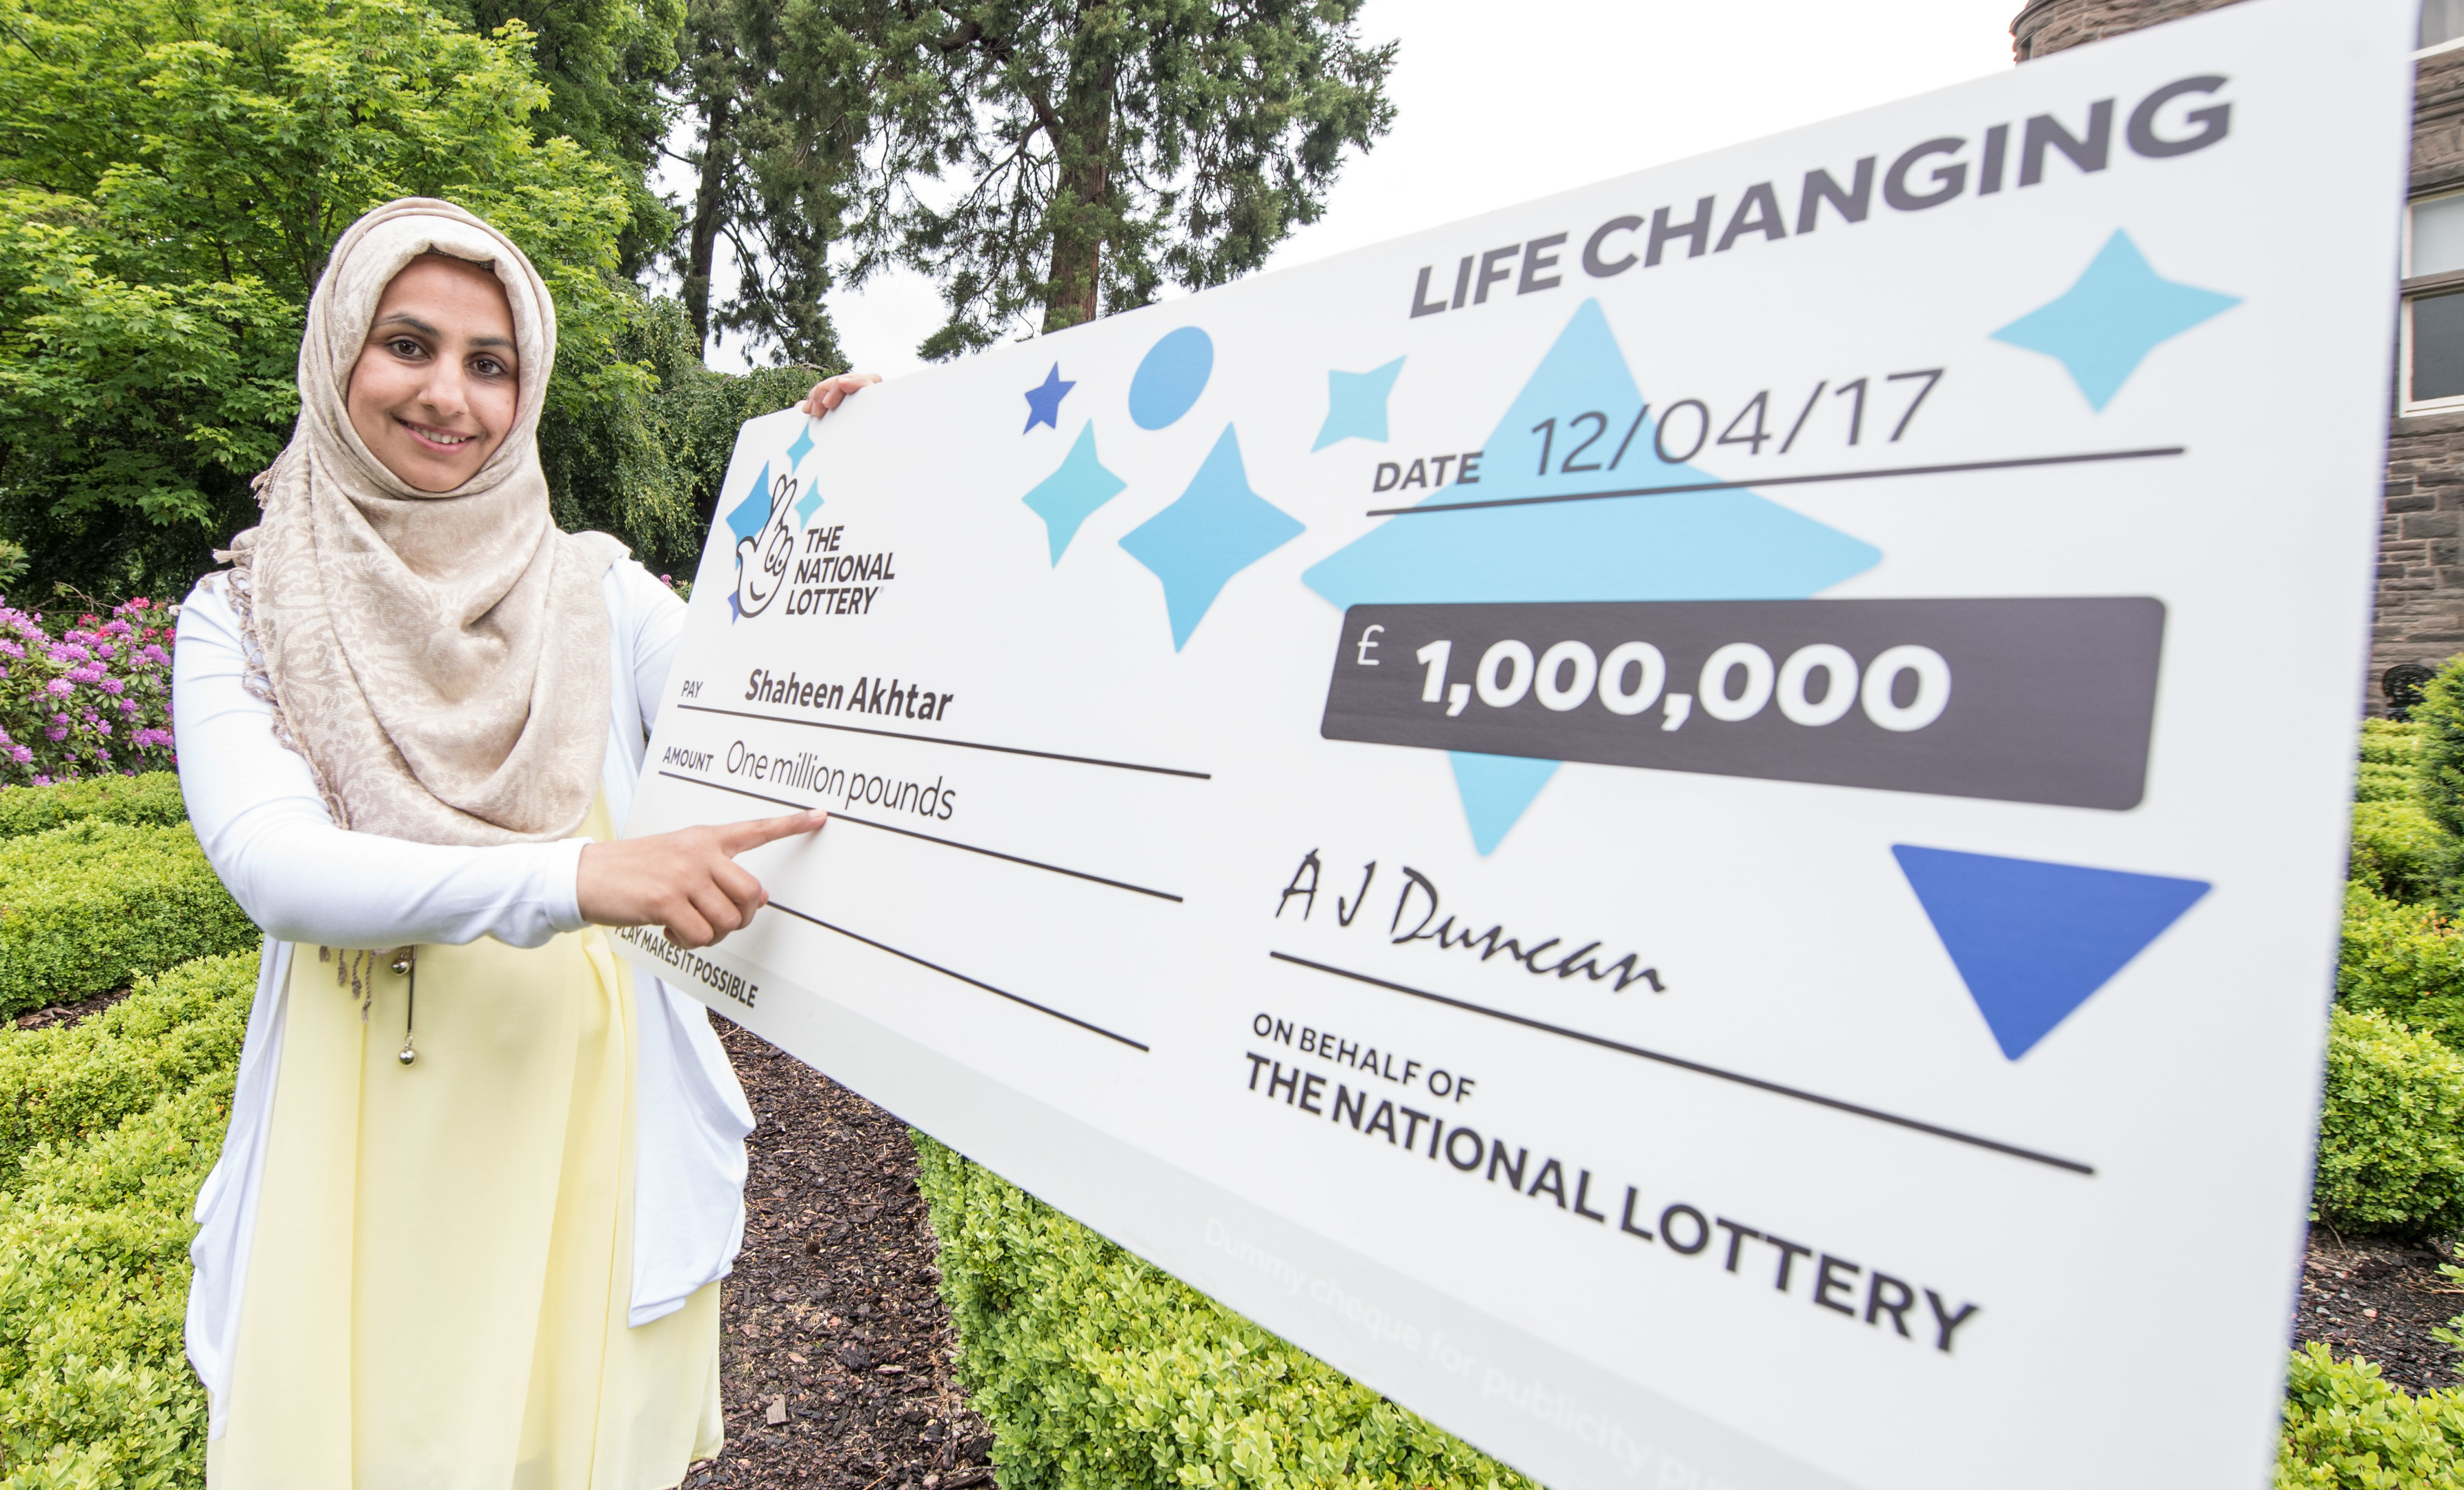 Dundee mum-of-three Shaheen Akhtar was one of the city's recent winners. She bagged £1 million in April 2017